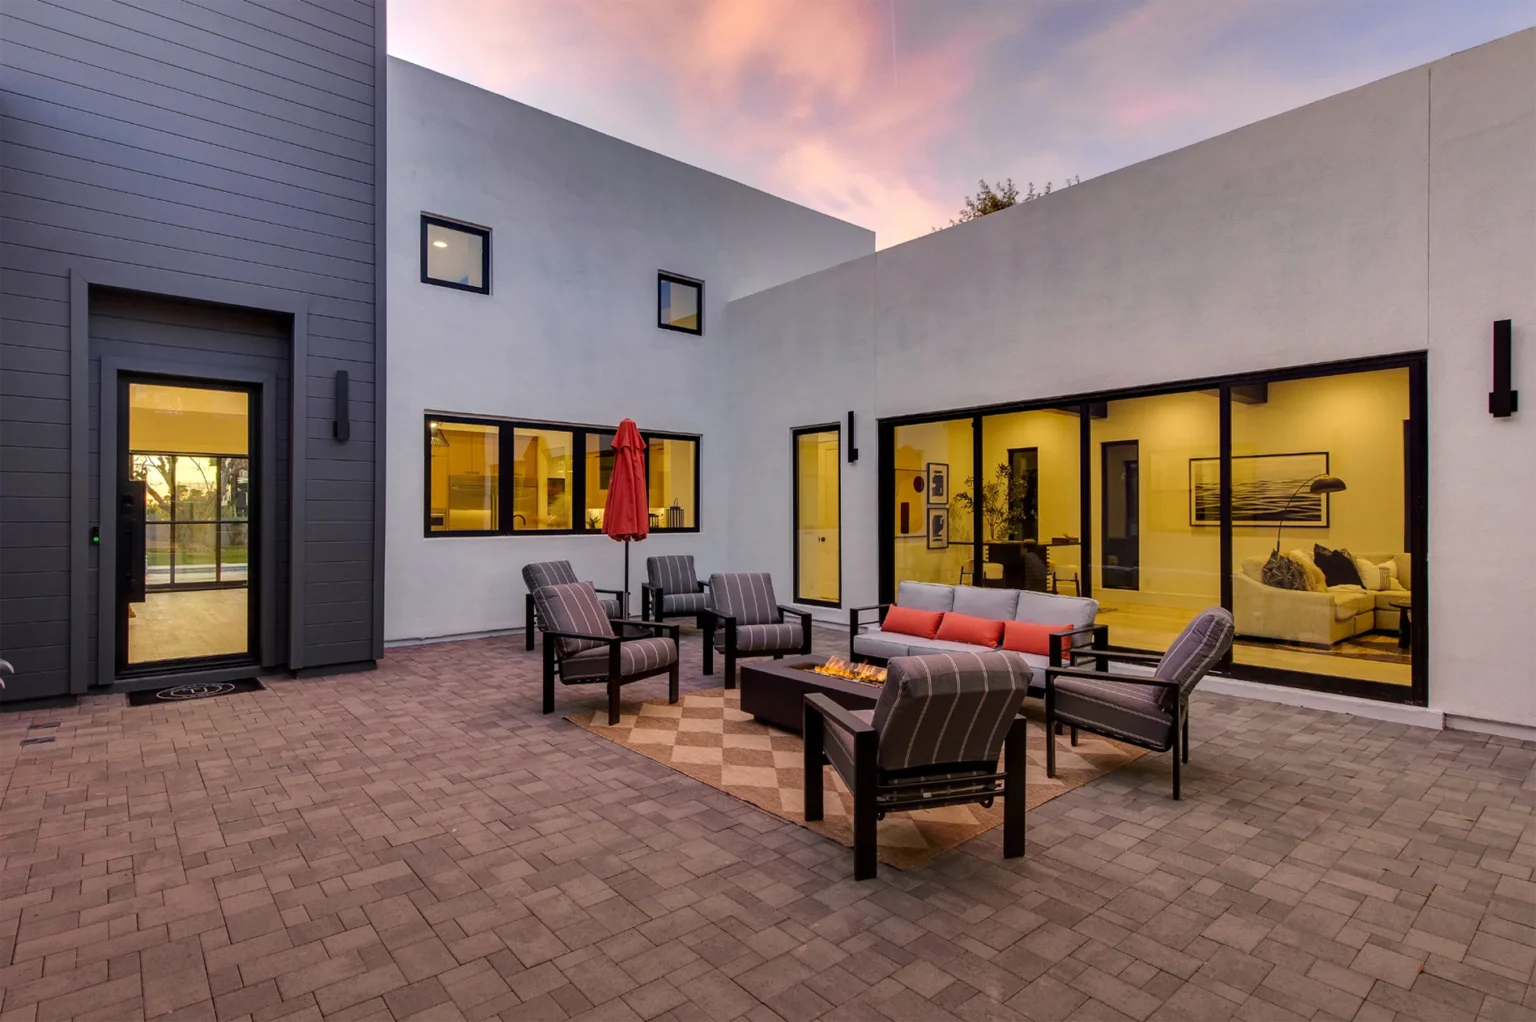 Phoenix Modern Style Home back yard patio, pavers, outdoor furniture